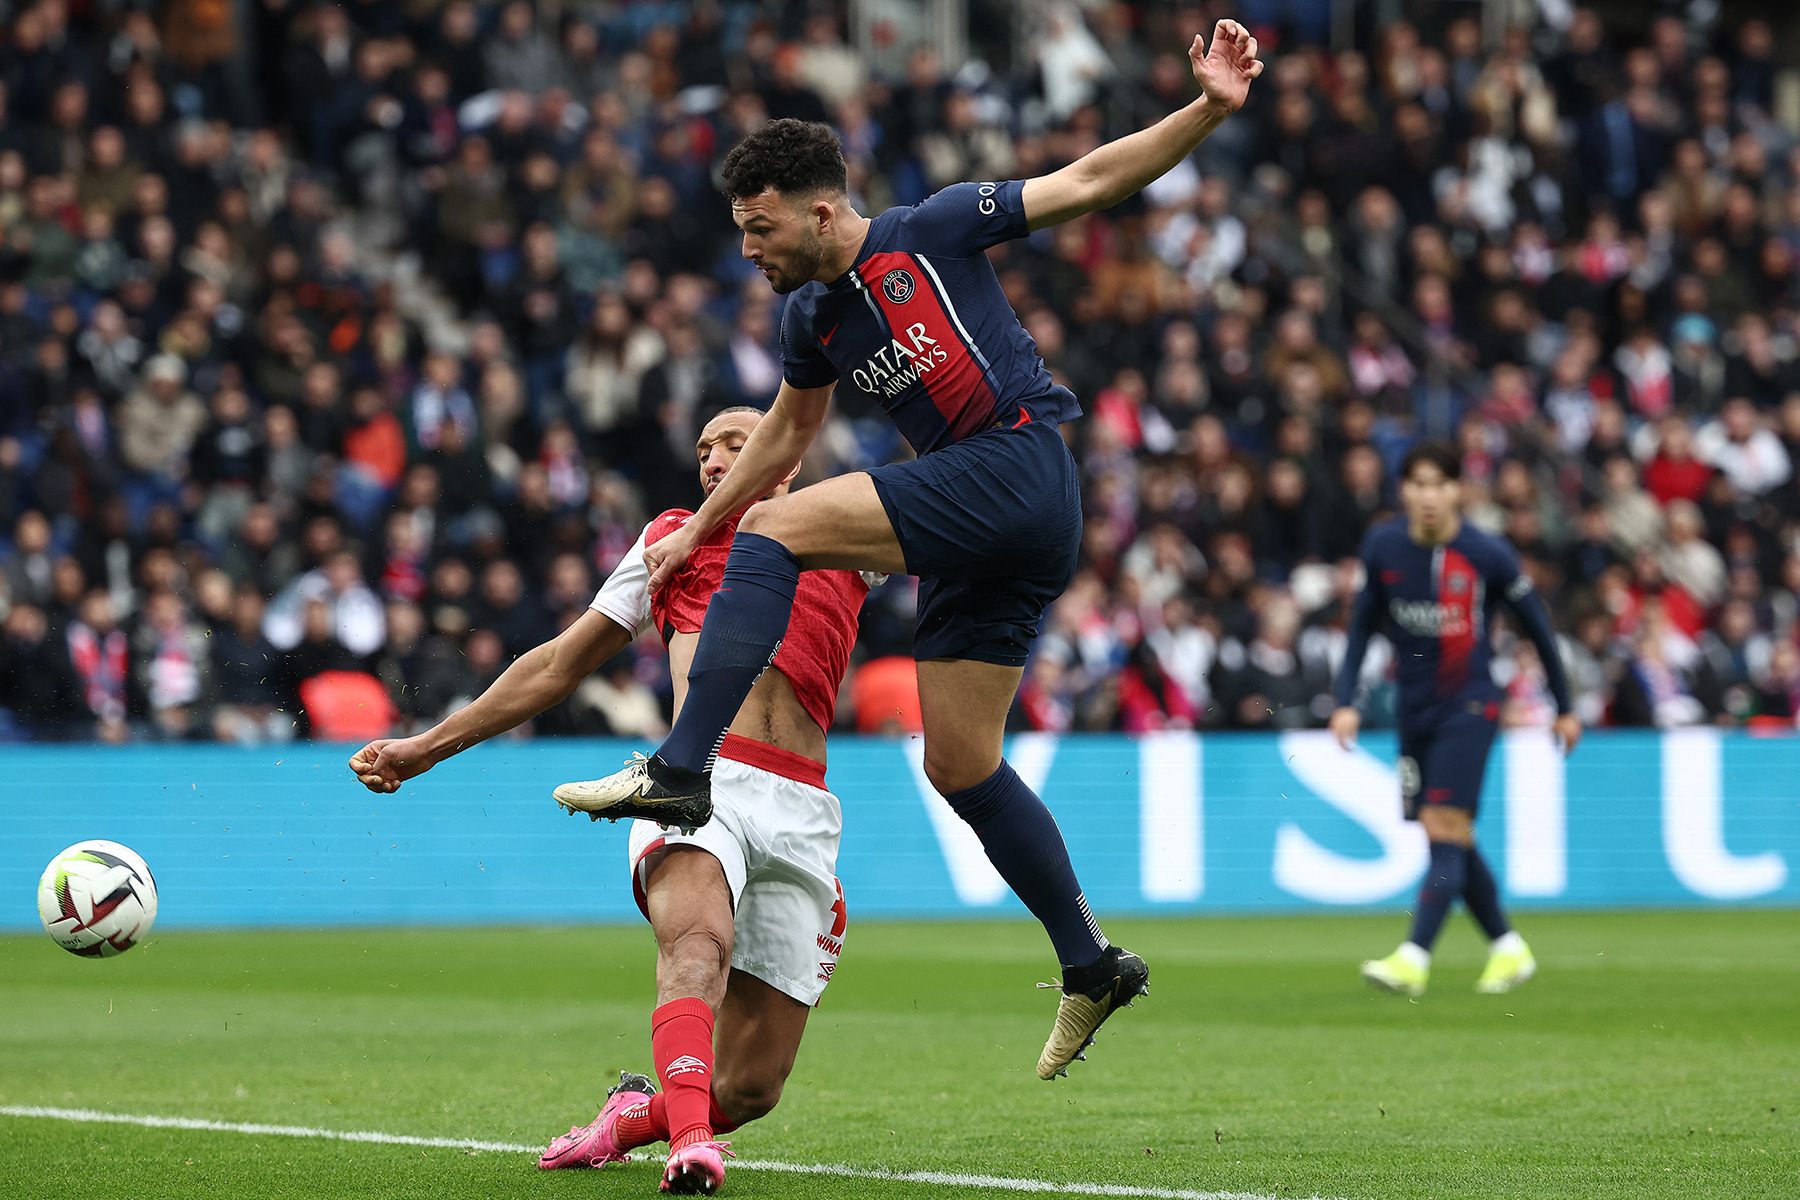 Gonçalo Ramos Fires PSG Into the Lead Against Reims (Video) - PSG Talk